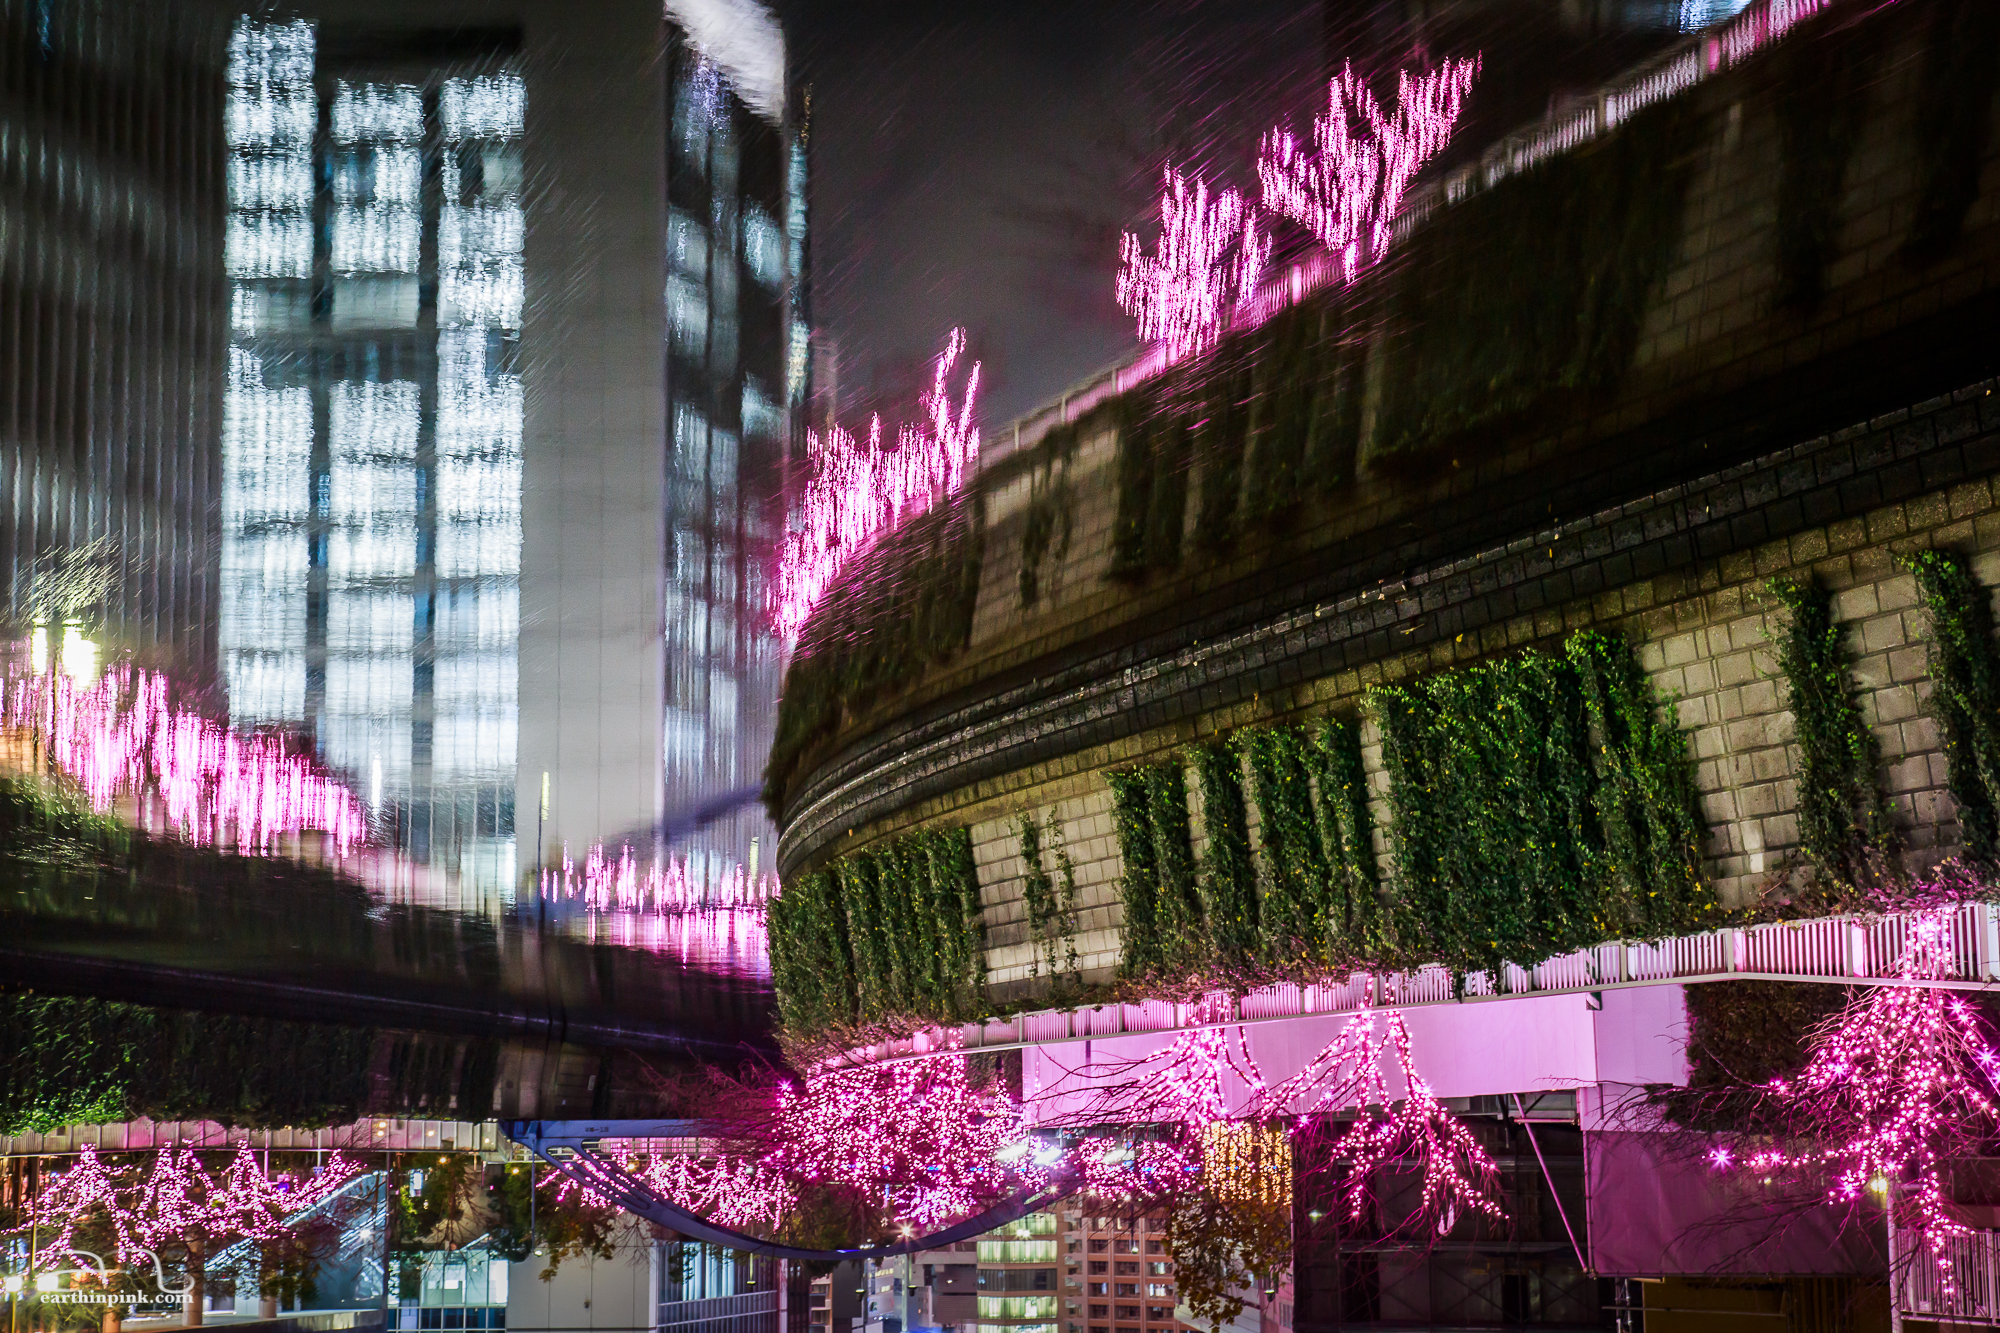 An upside-down photo of the cherry trees dressed in pink lights, reflected in the Meguro river. Because of the long exposure, you can see little streaks of light as the water is flowing.